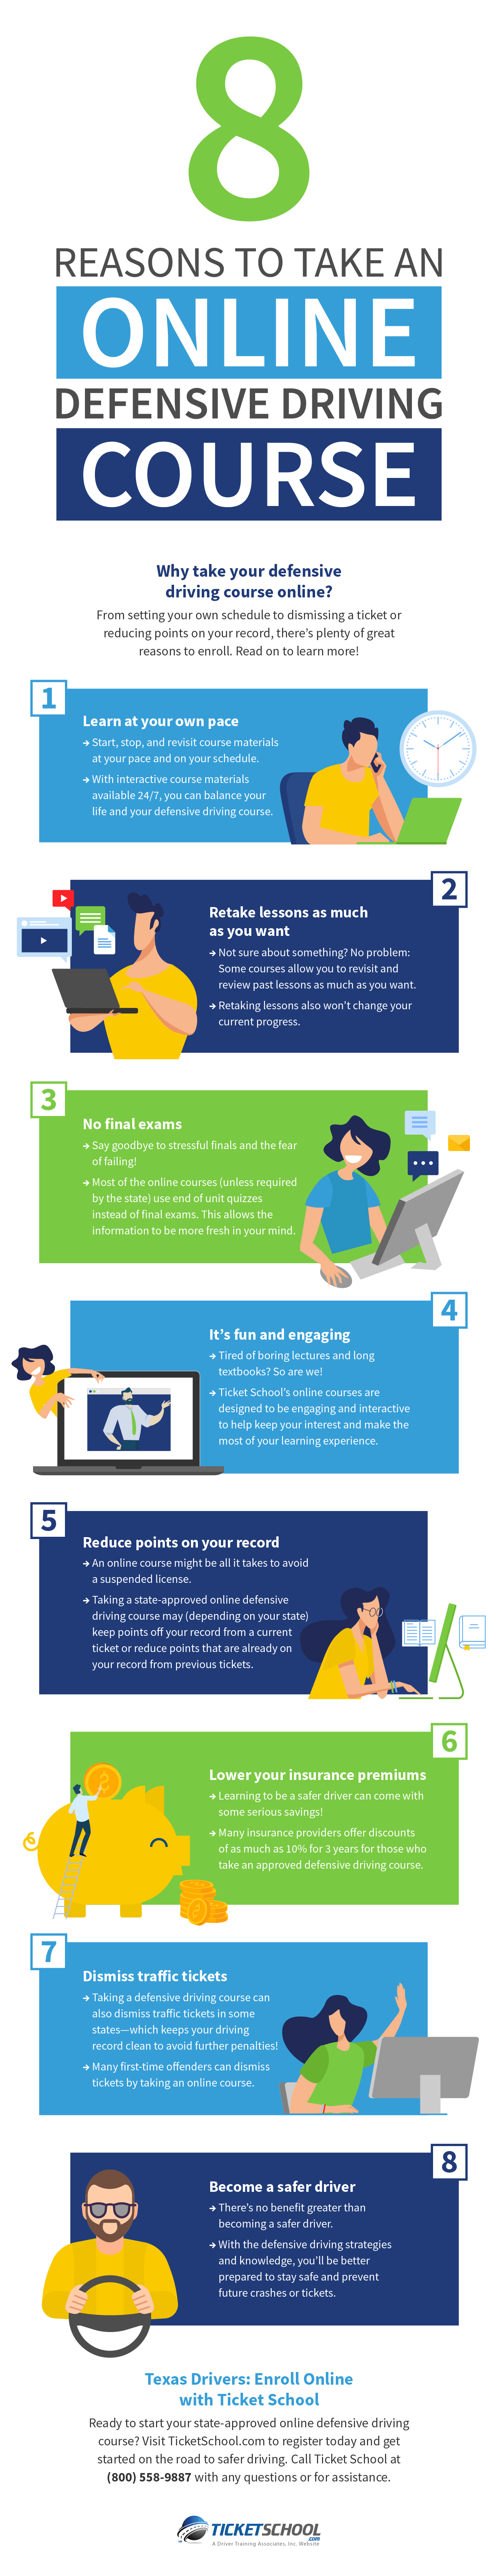 8 Reasons to Take an Online Defensive Driving Course Infographic